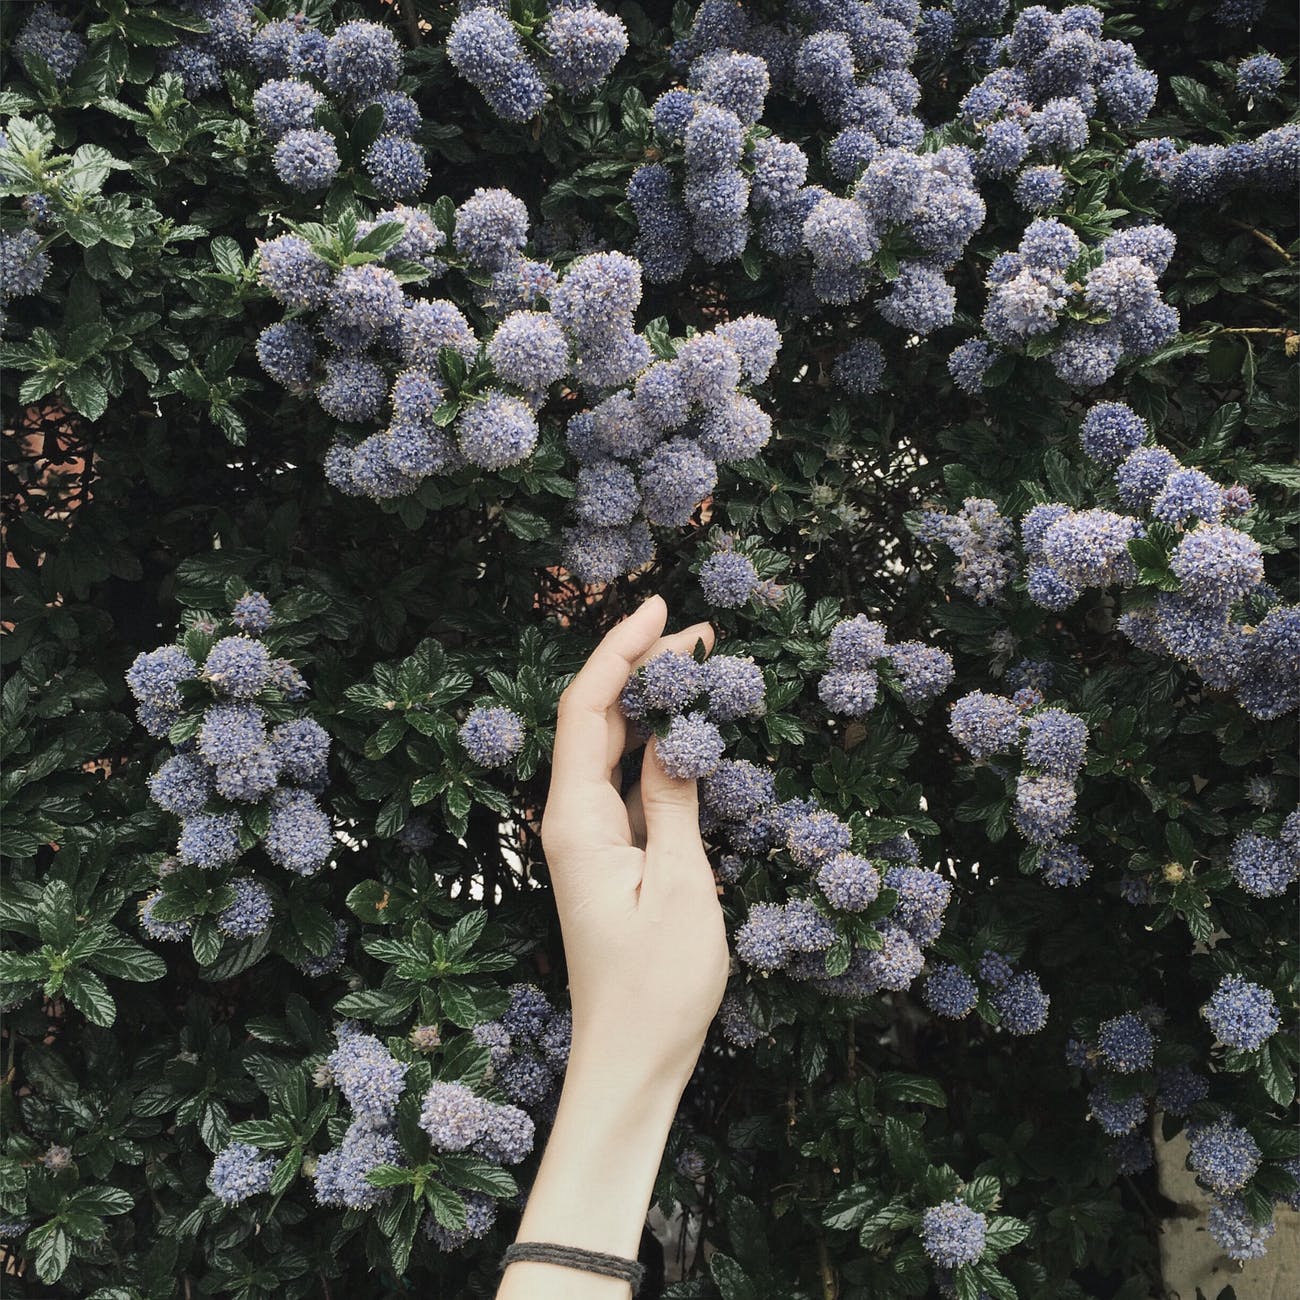 person touching blue flower